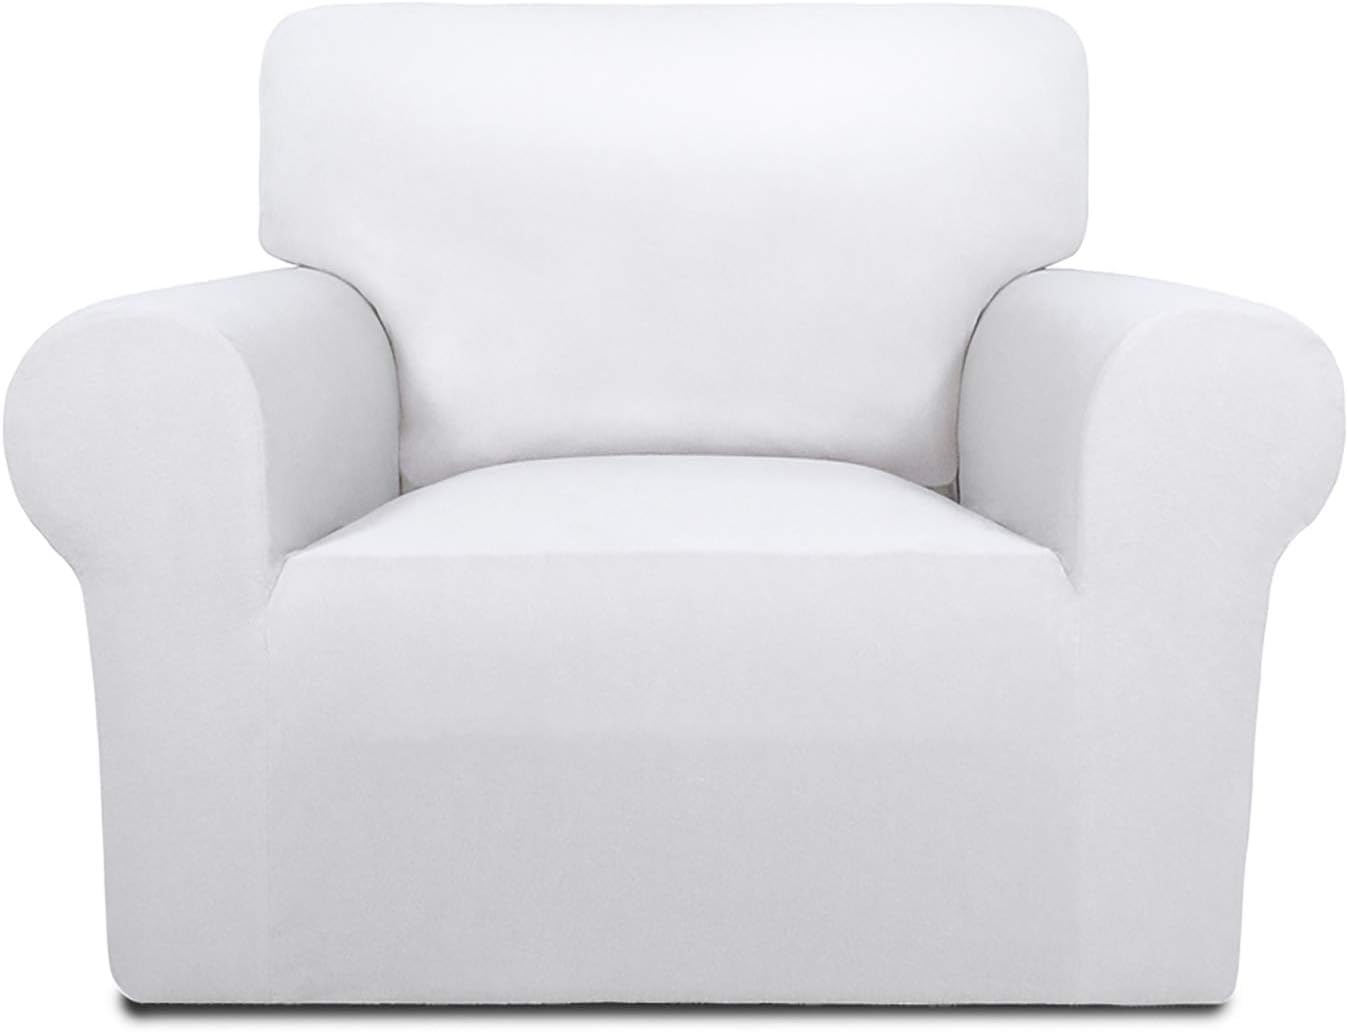 PureFit Super Stretch Chair Sofa Slipcover  Spandex Non Slip Soft Couch Sofa Cover, Washable Furniture Protector with Non Skid Foam and Elastic Bottom for Kids, Pets Chair, White